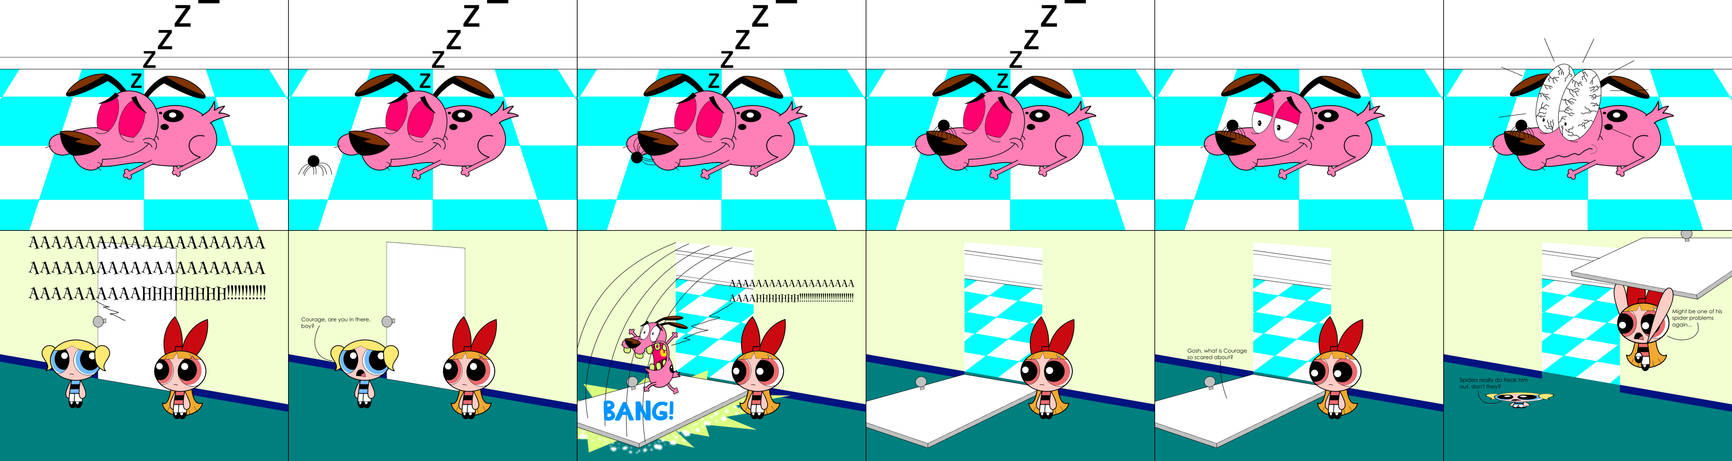 Brain Training For Dogs #16 by daovanlinh on DeviantArt